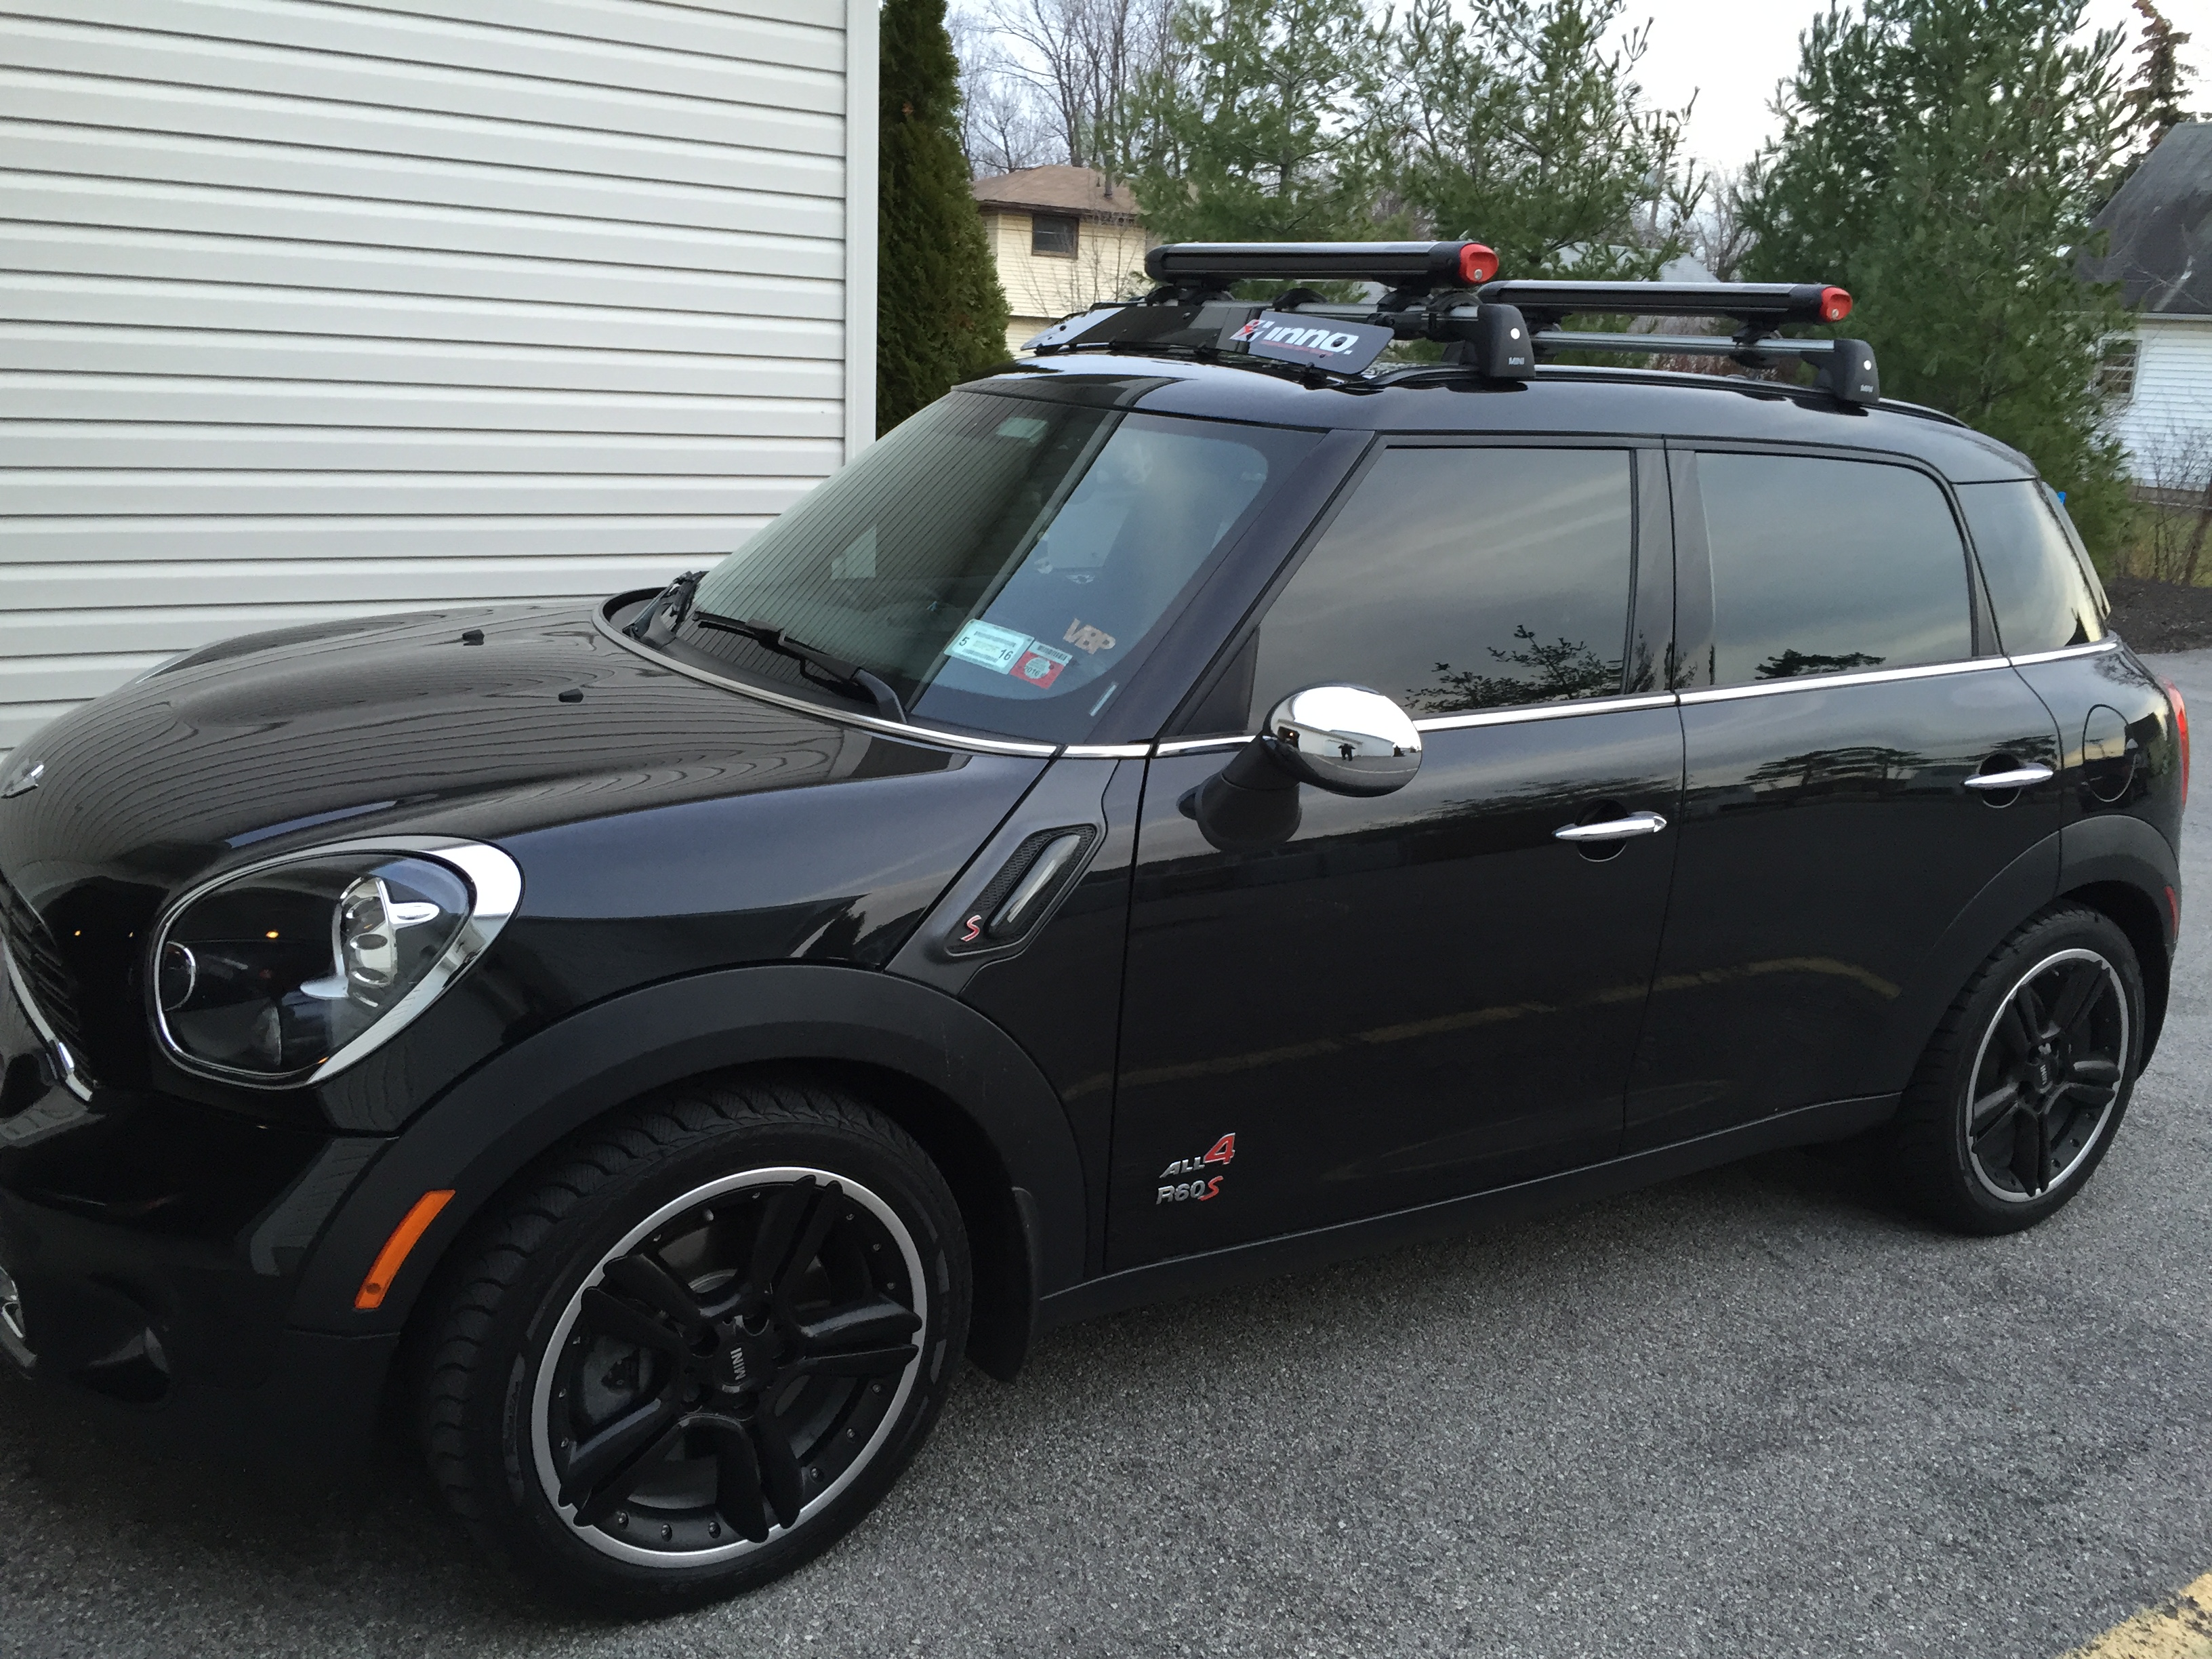 Anyone got an opinion on roof racks? - North American Motoring Roof Rack For Mini Cooper With Sunroof